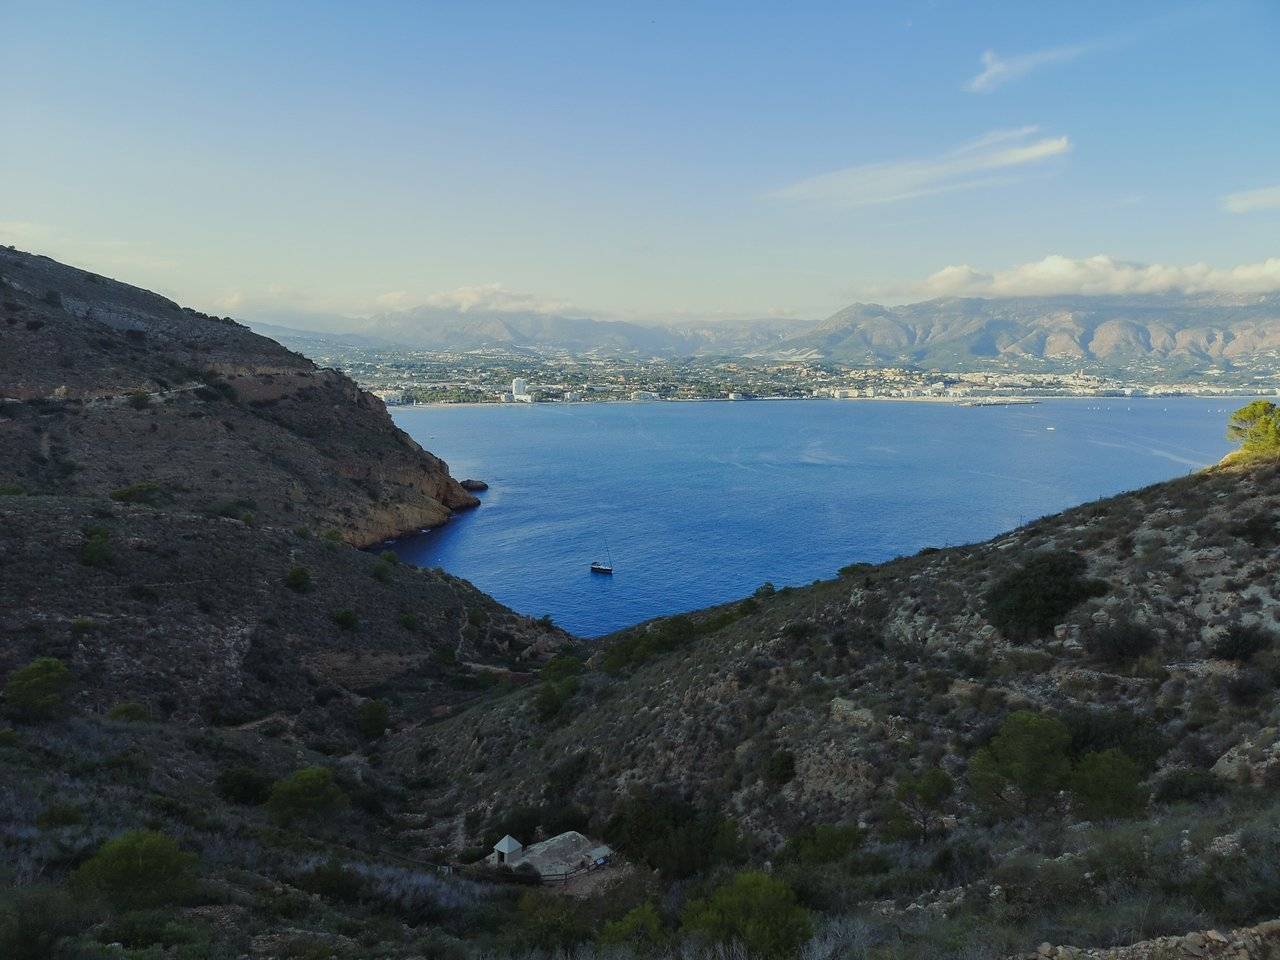   The coves of Serra Gelada and Benidorm Island were regular hideouts for pirates between the 16th and 18th centuries. Photo by Alis Monte [CC BY-SA 4.0], via Connecting the Dots